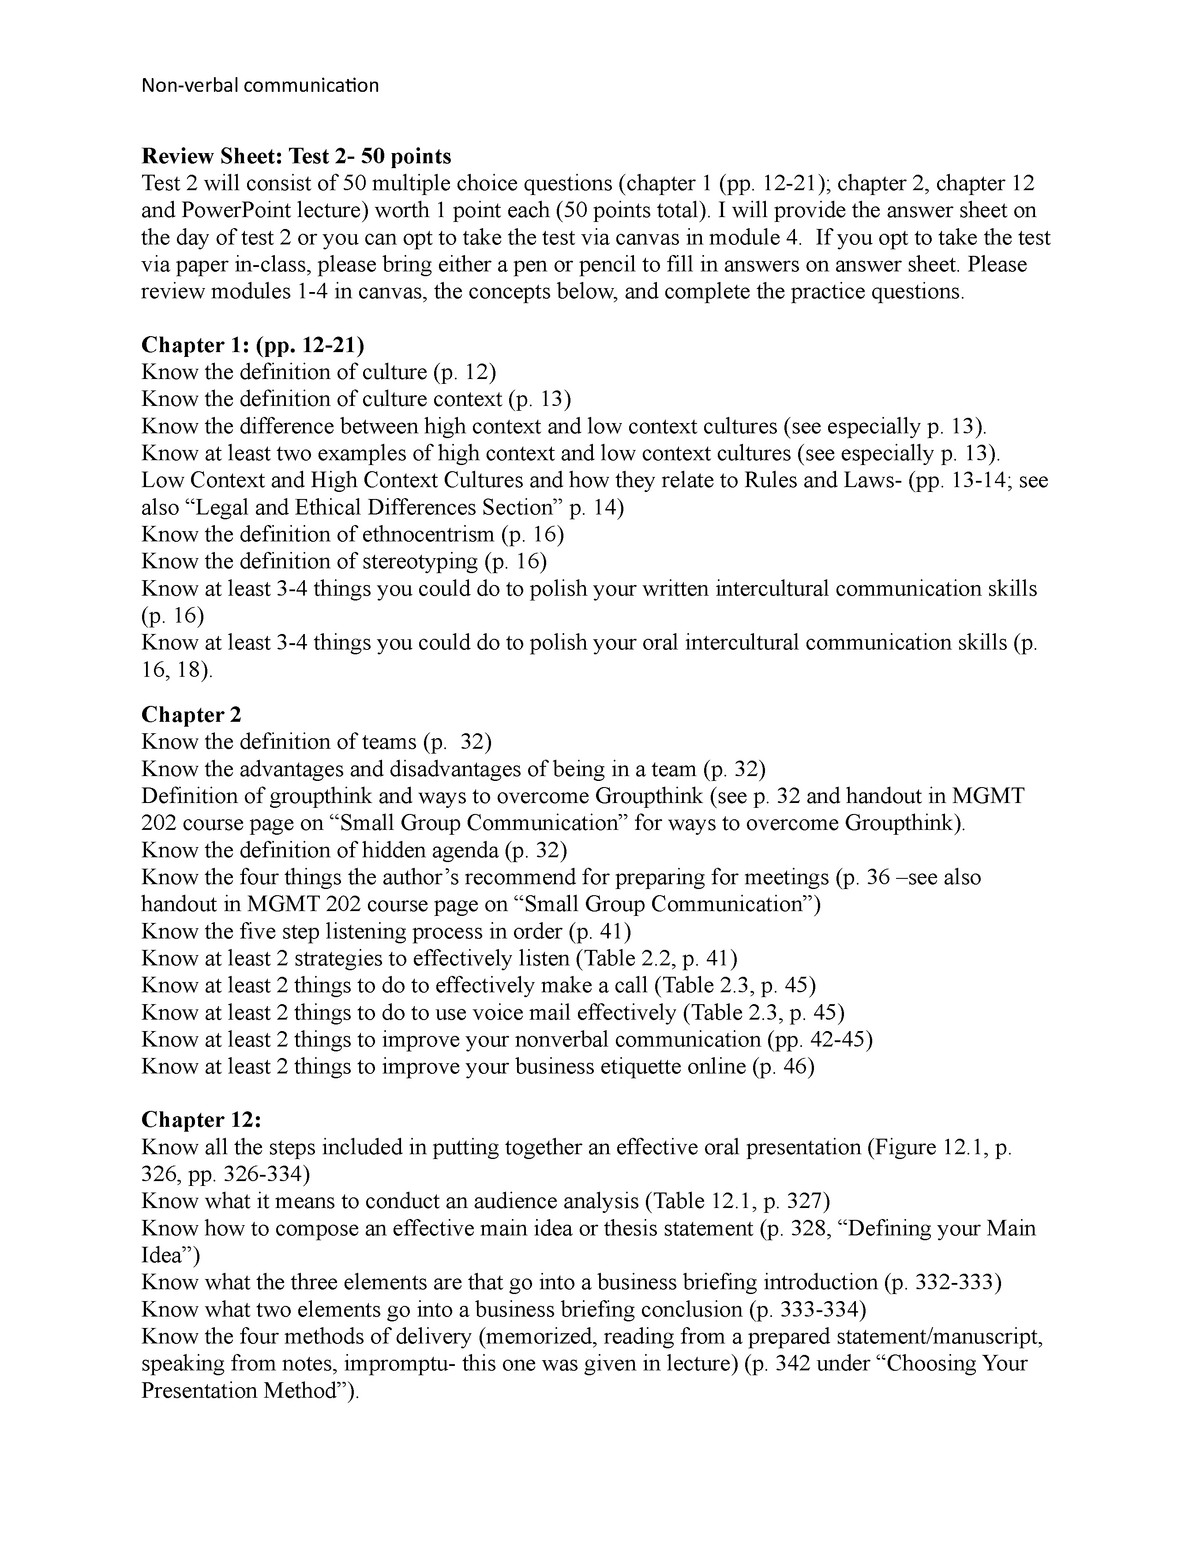 Exam review non-verbal communication - Review Sheet: Test 2- 50 points ...